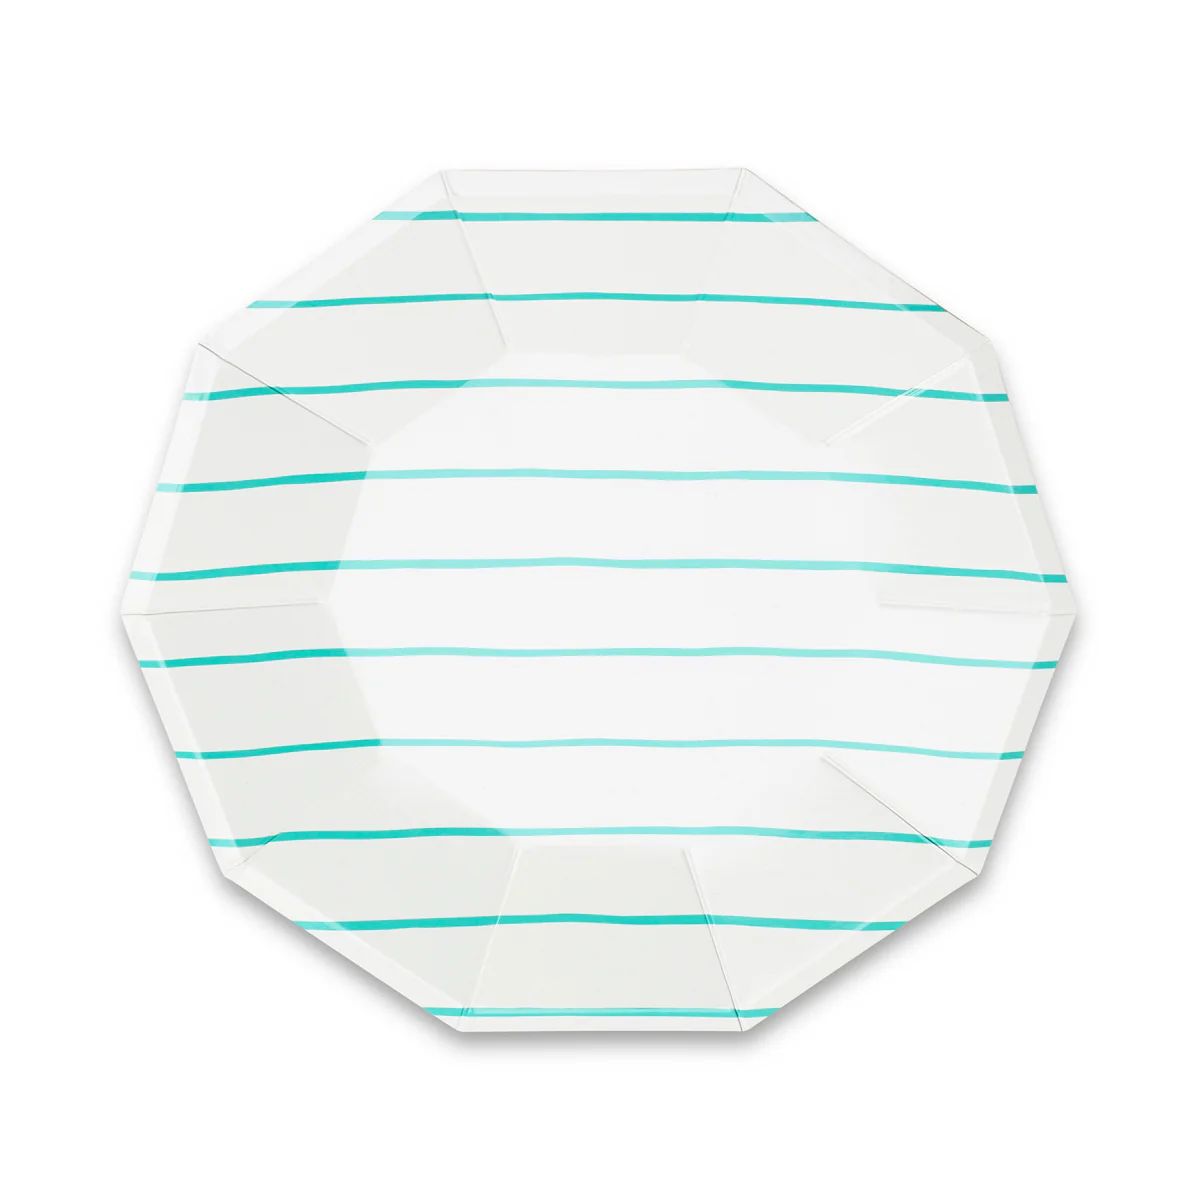 Frenchie Striped Large Paper Plates - Aqua Blue | Ellie and Piper